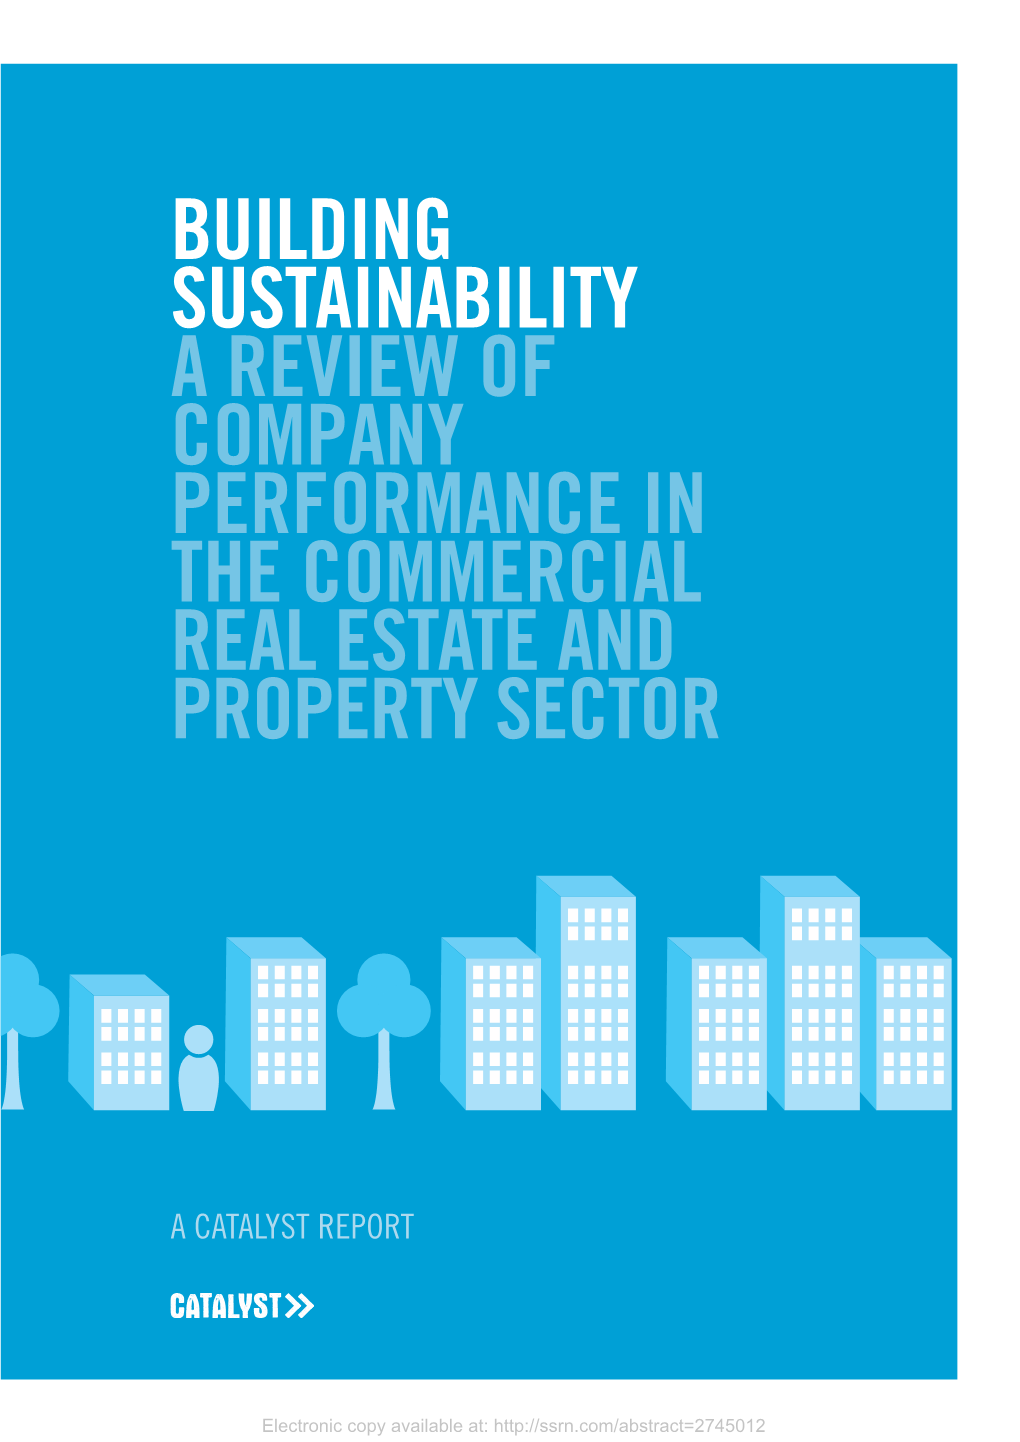 Building Sustainability a Review of Company Performance in the Commercial Real Estate and Property Sector